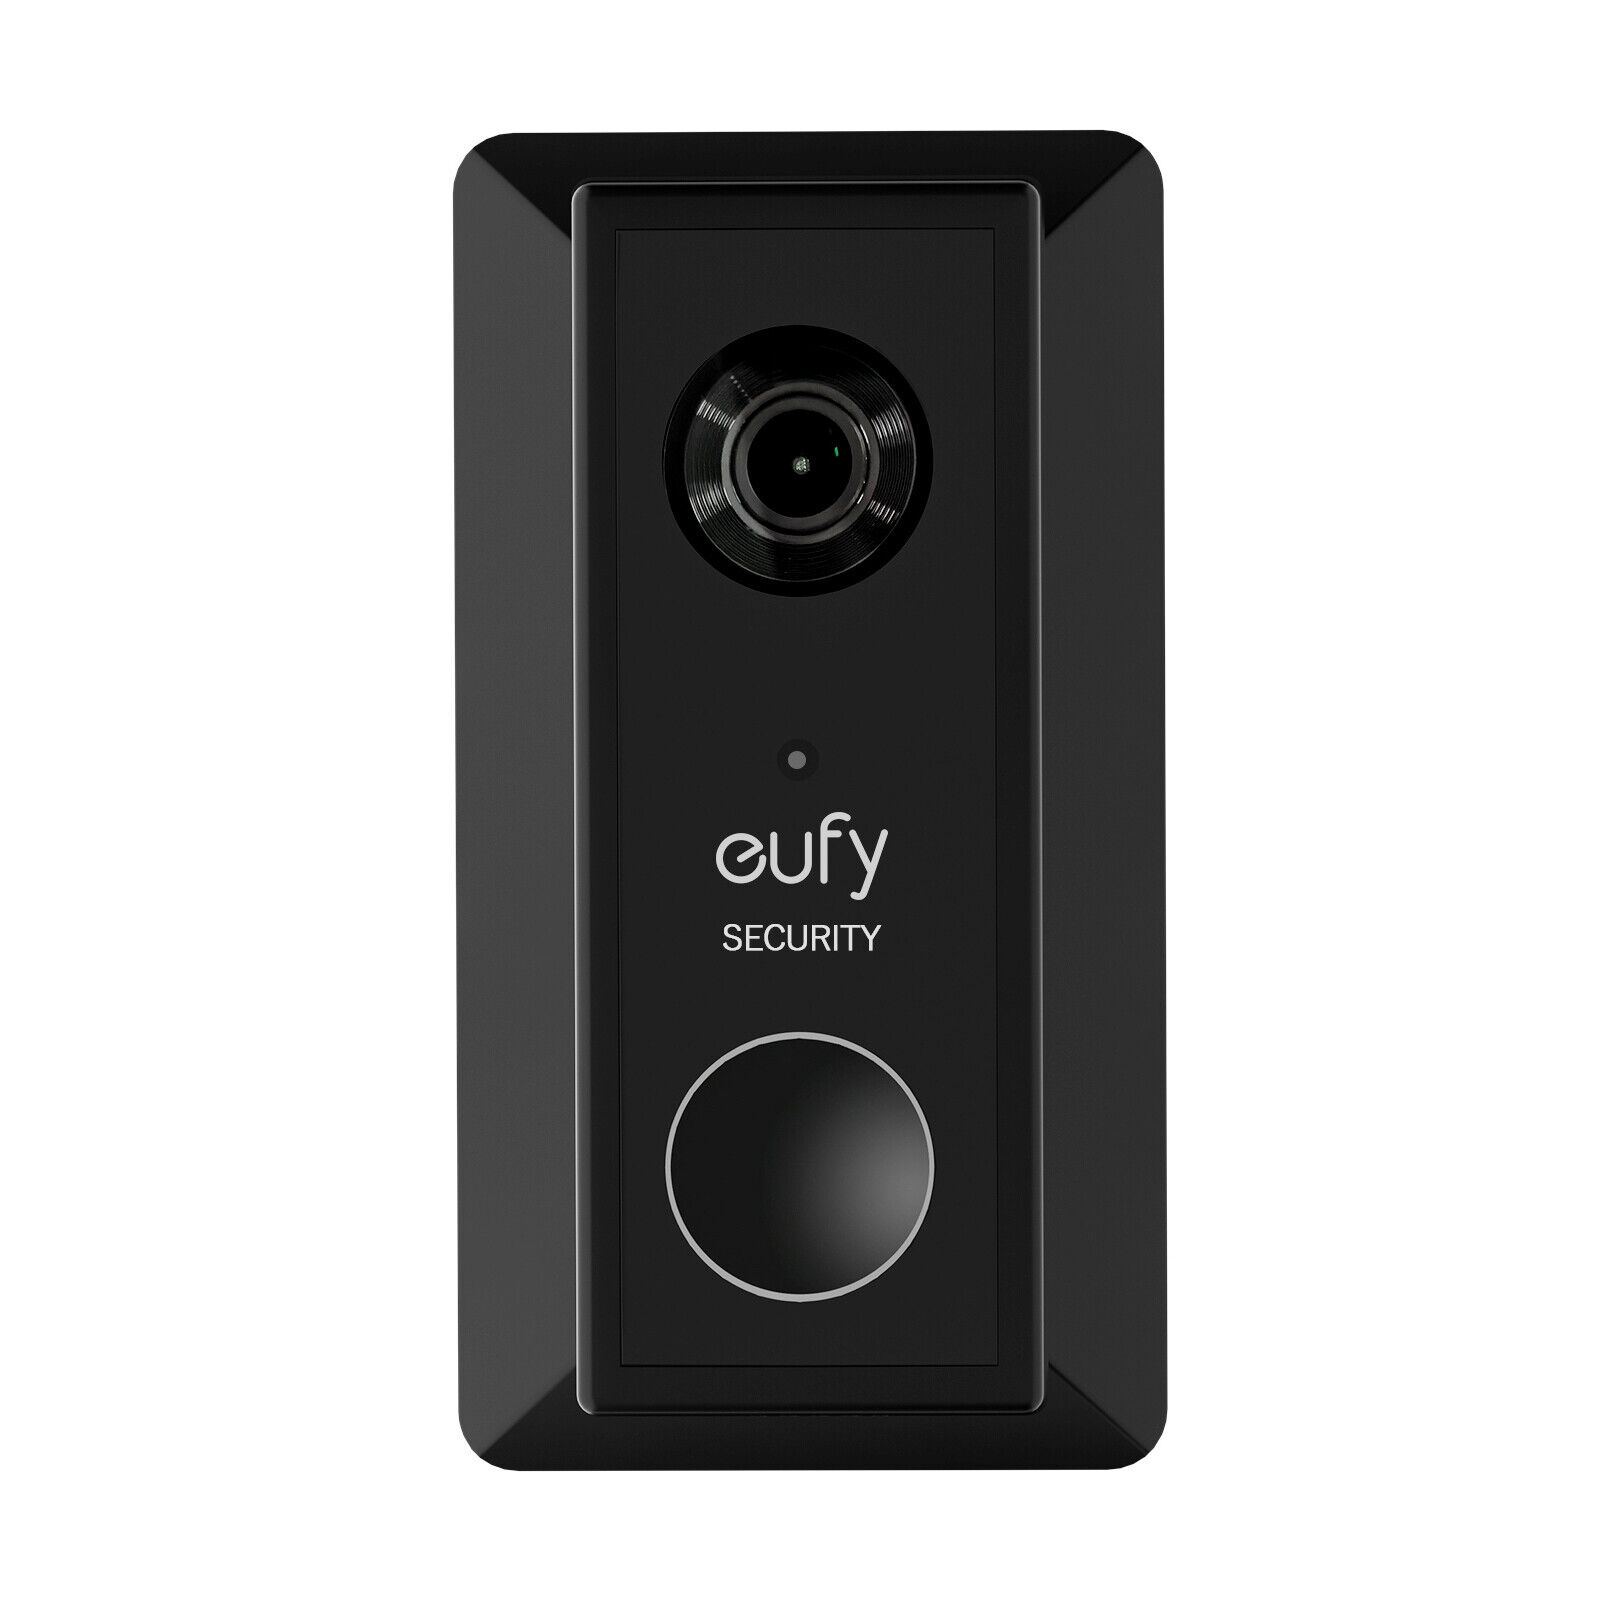 Wall Plate Come With L35°/r35 ° Wedge Compatible With Eufy   Video Z6k8